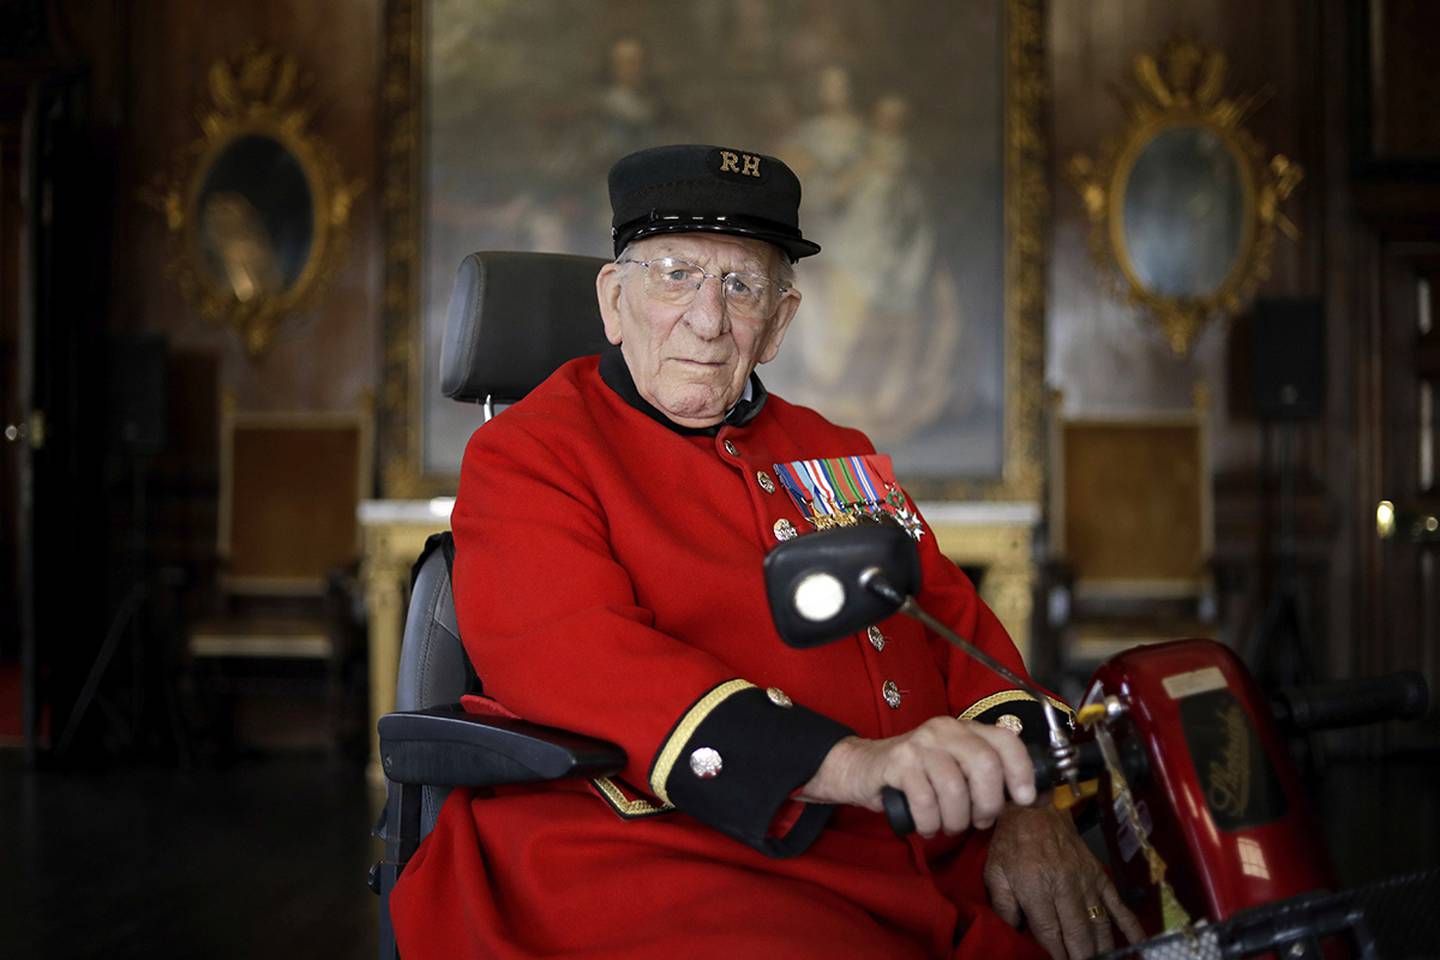 British D-Day veteran Frank Mouque poses for a portrait during a 75th anniversary D-Day event.